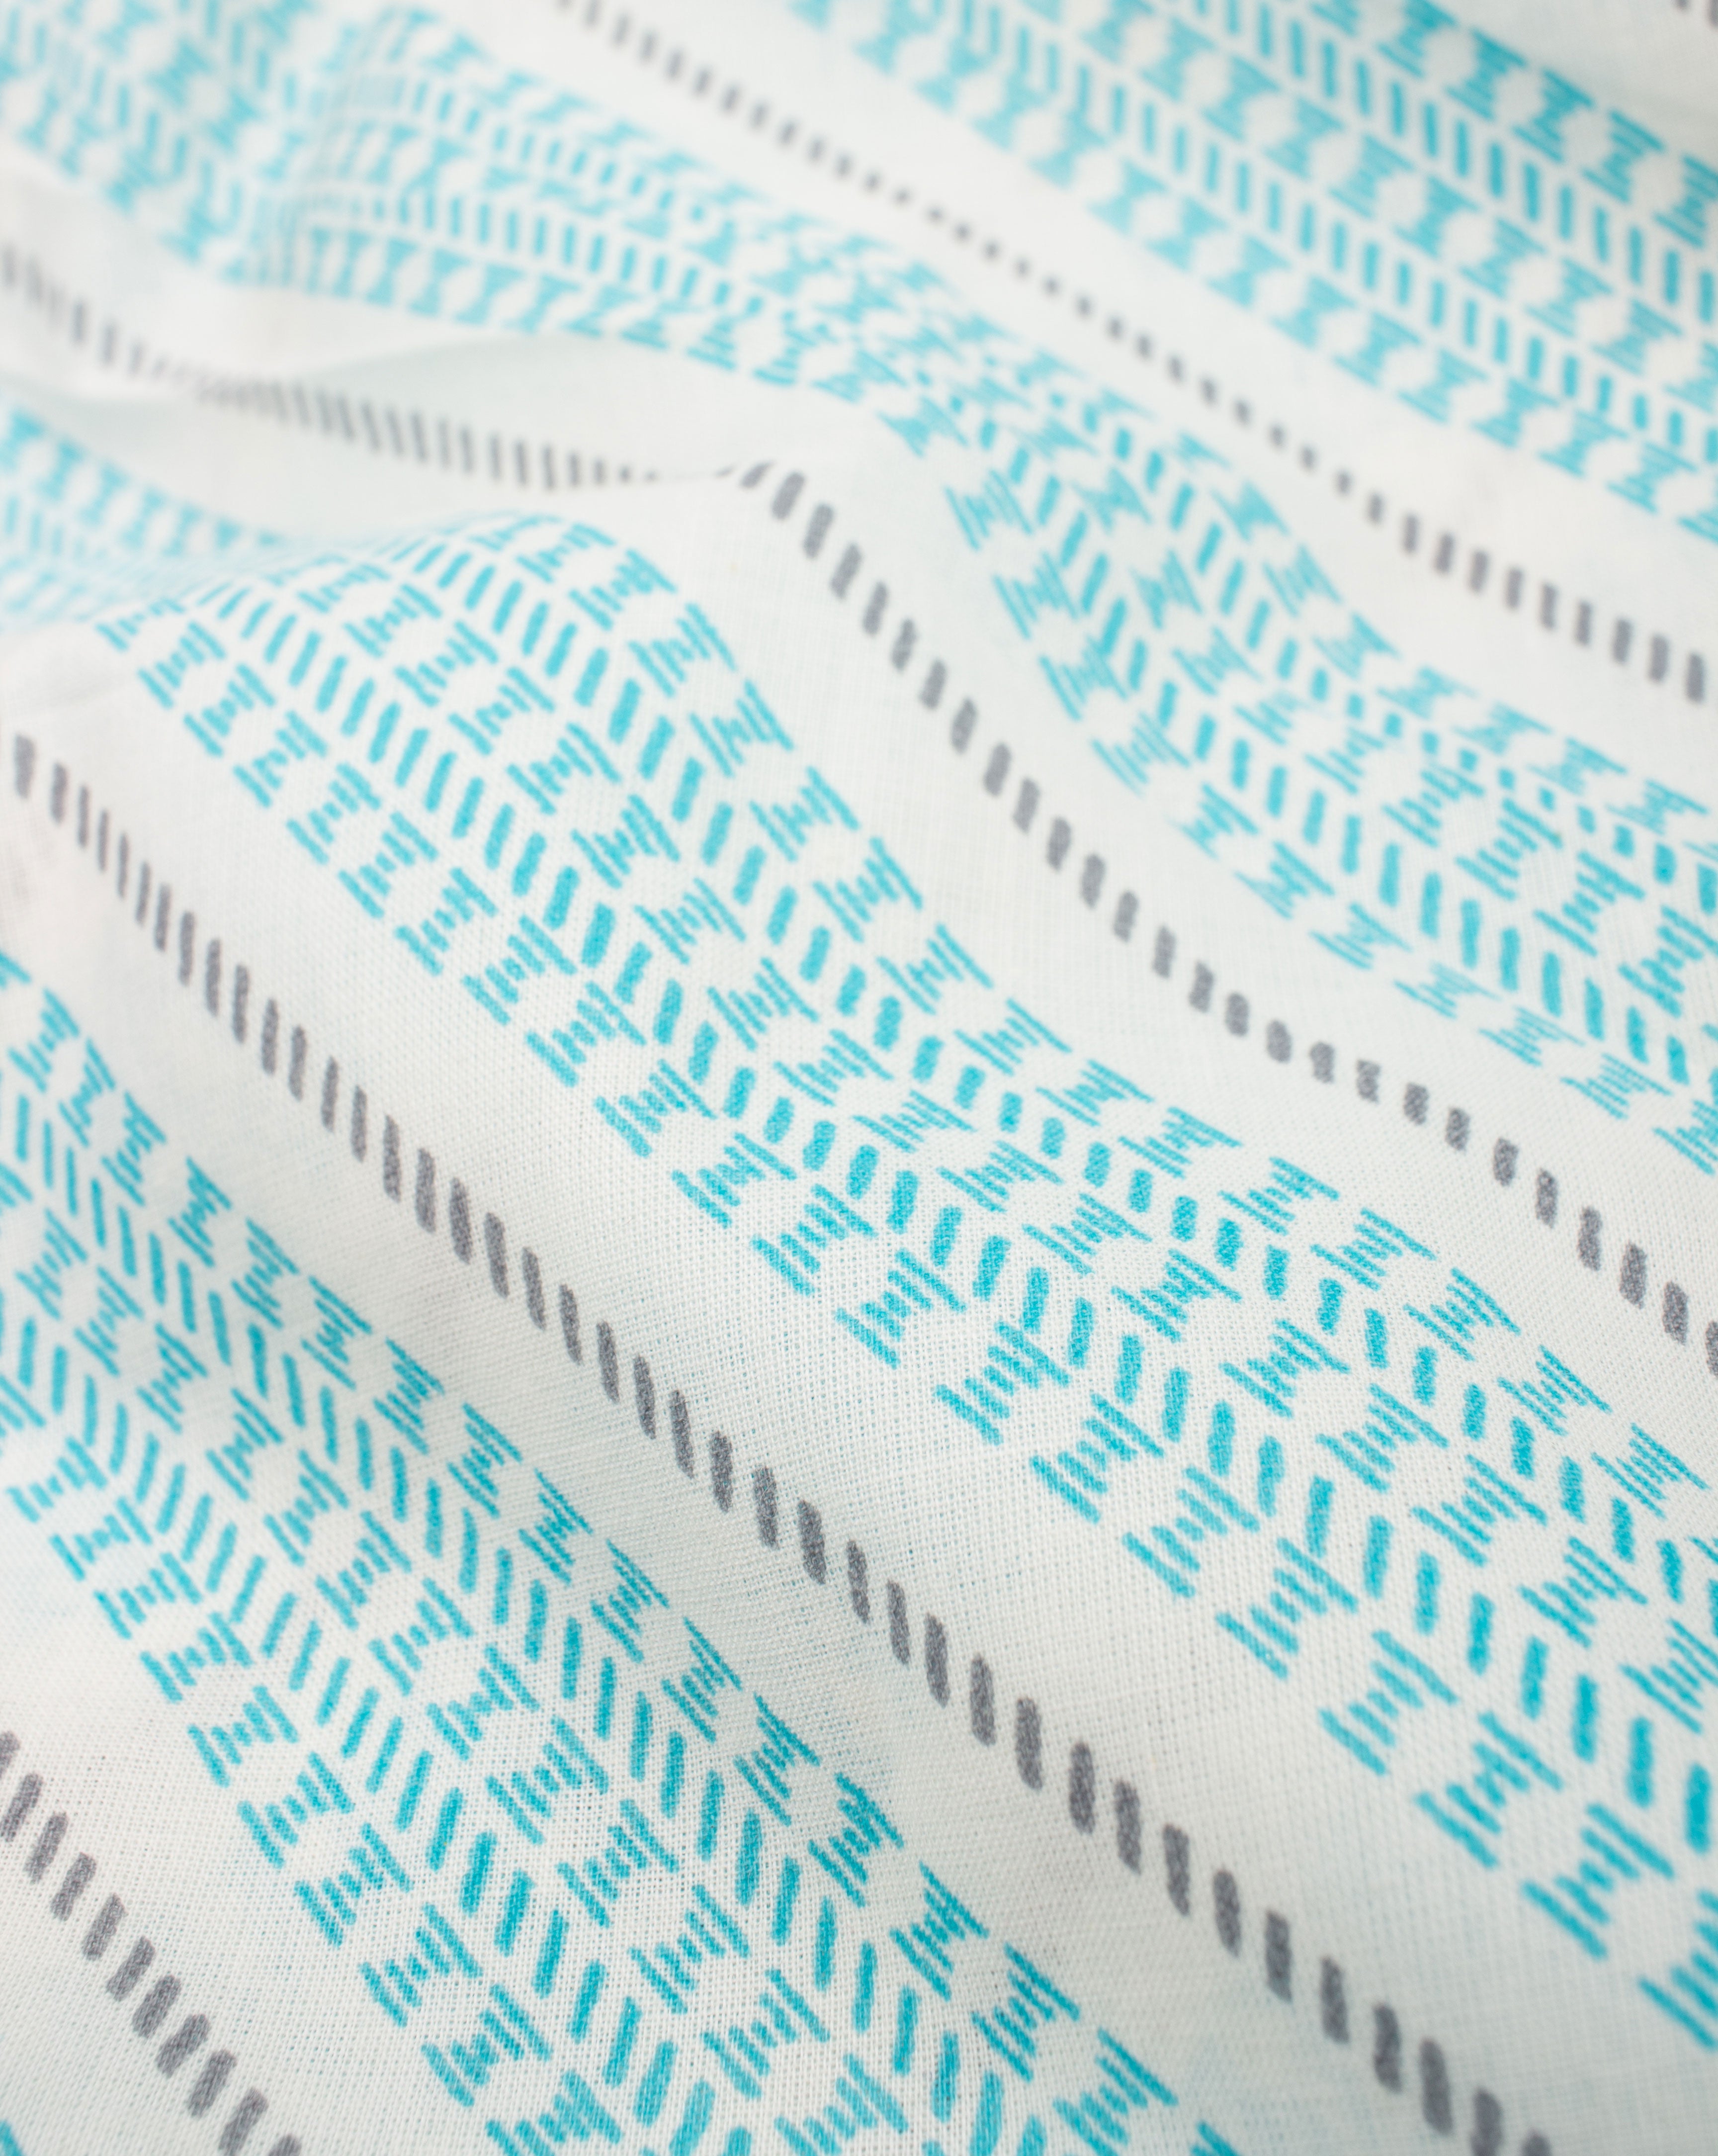 Off-White Turquoise Stripes Pattern Screen Print Cotton Fabric - Fabriclore.com